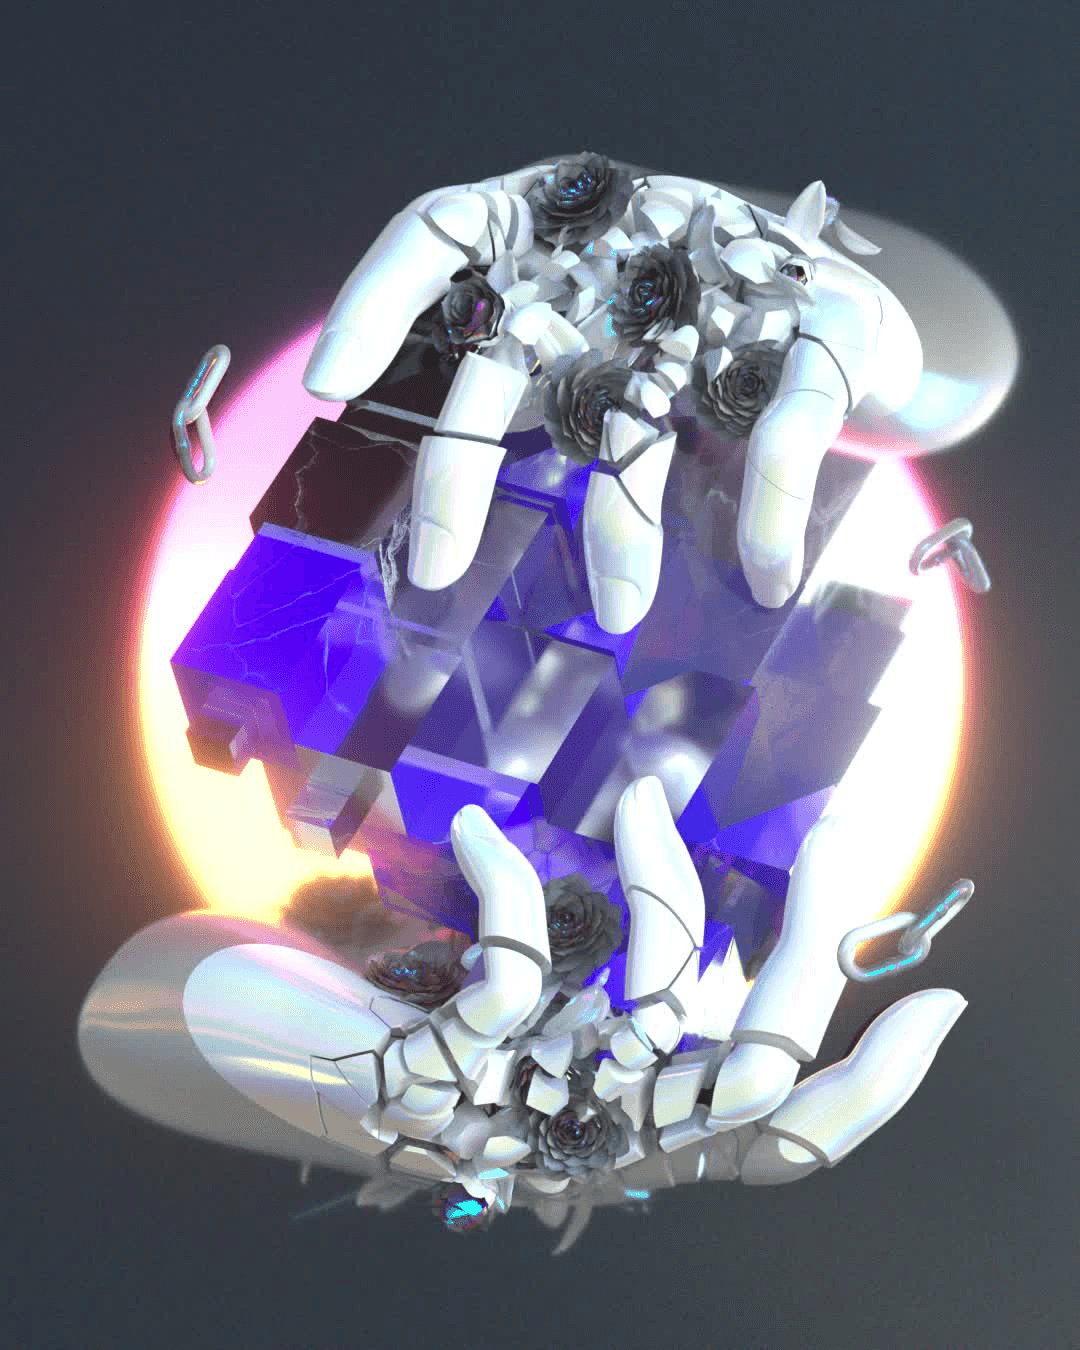 FVCK CUBE #145// by FVCKRENDER - CryptoCube#145 #1/1